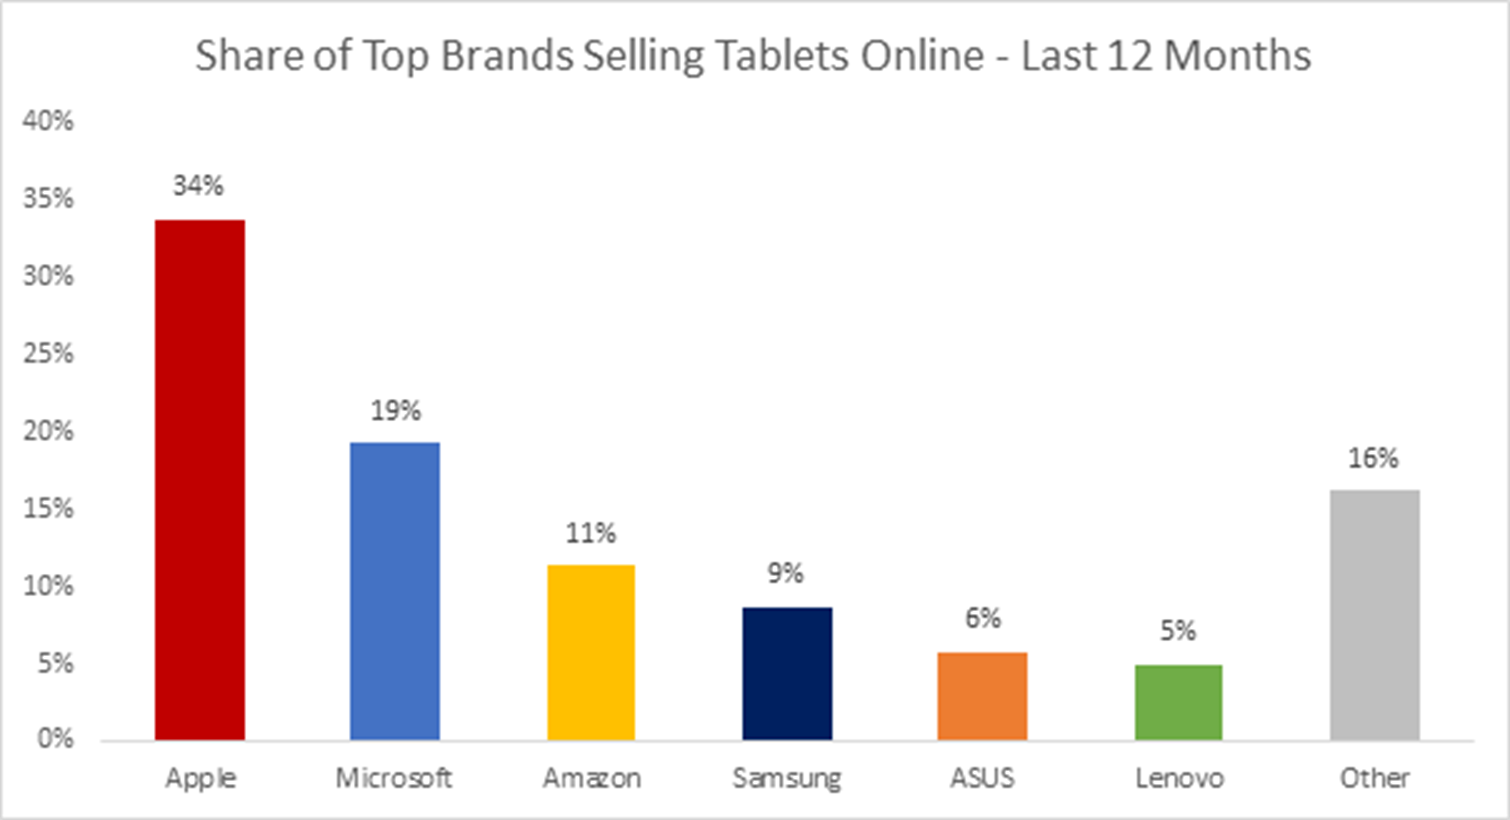 Share-of-Top-Brands-Selling-Tablets-Online